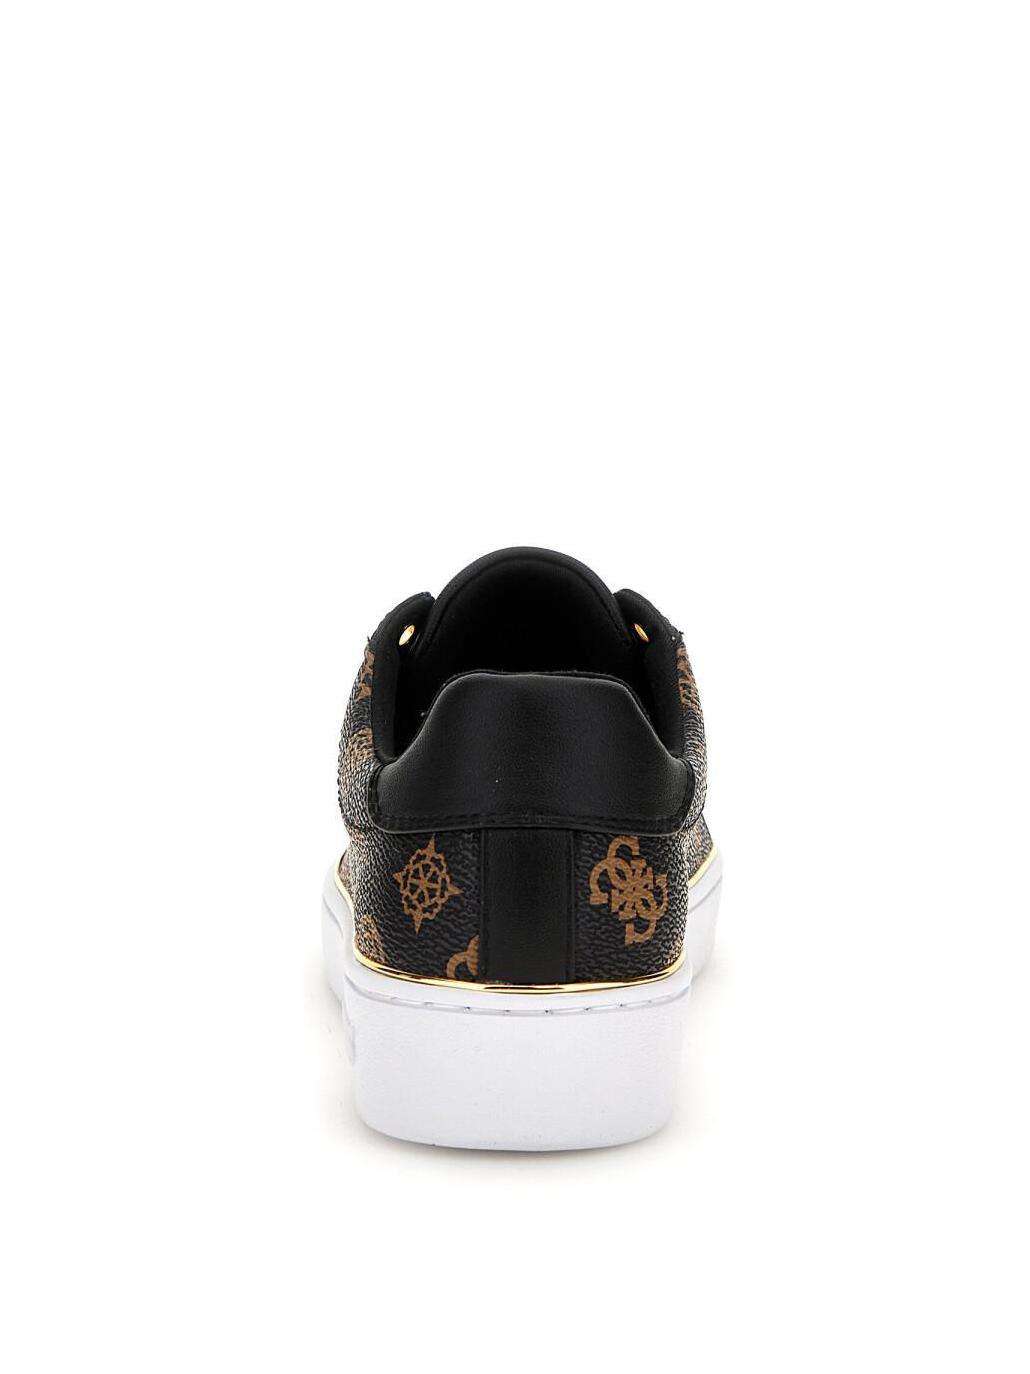 Details 204+ guess logo sneakers